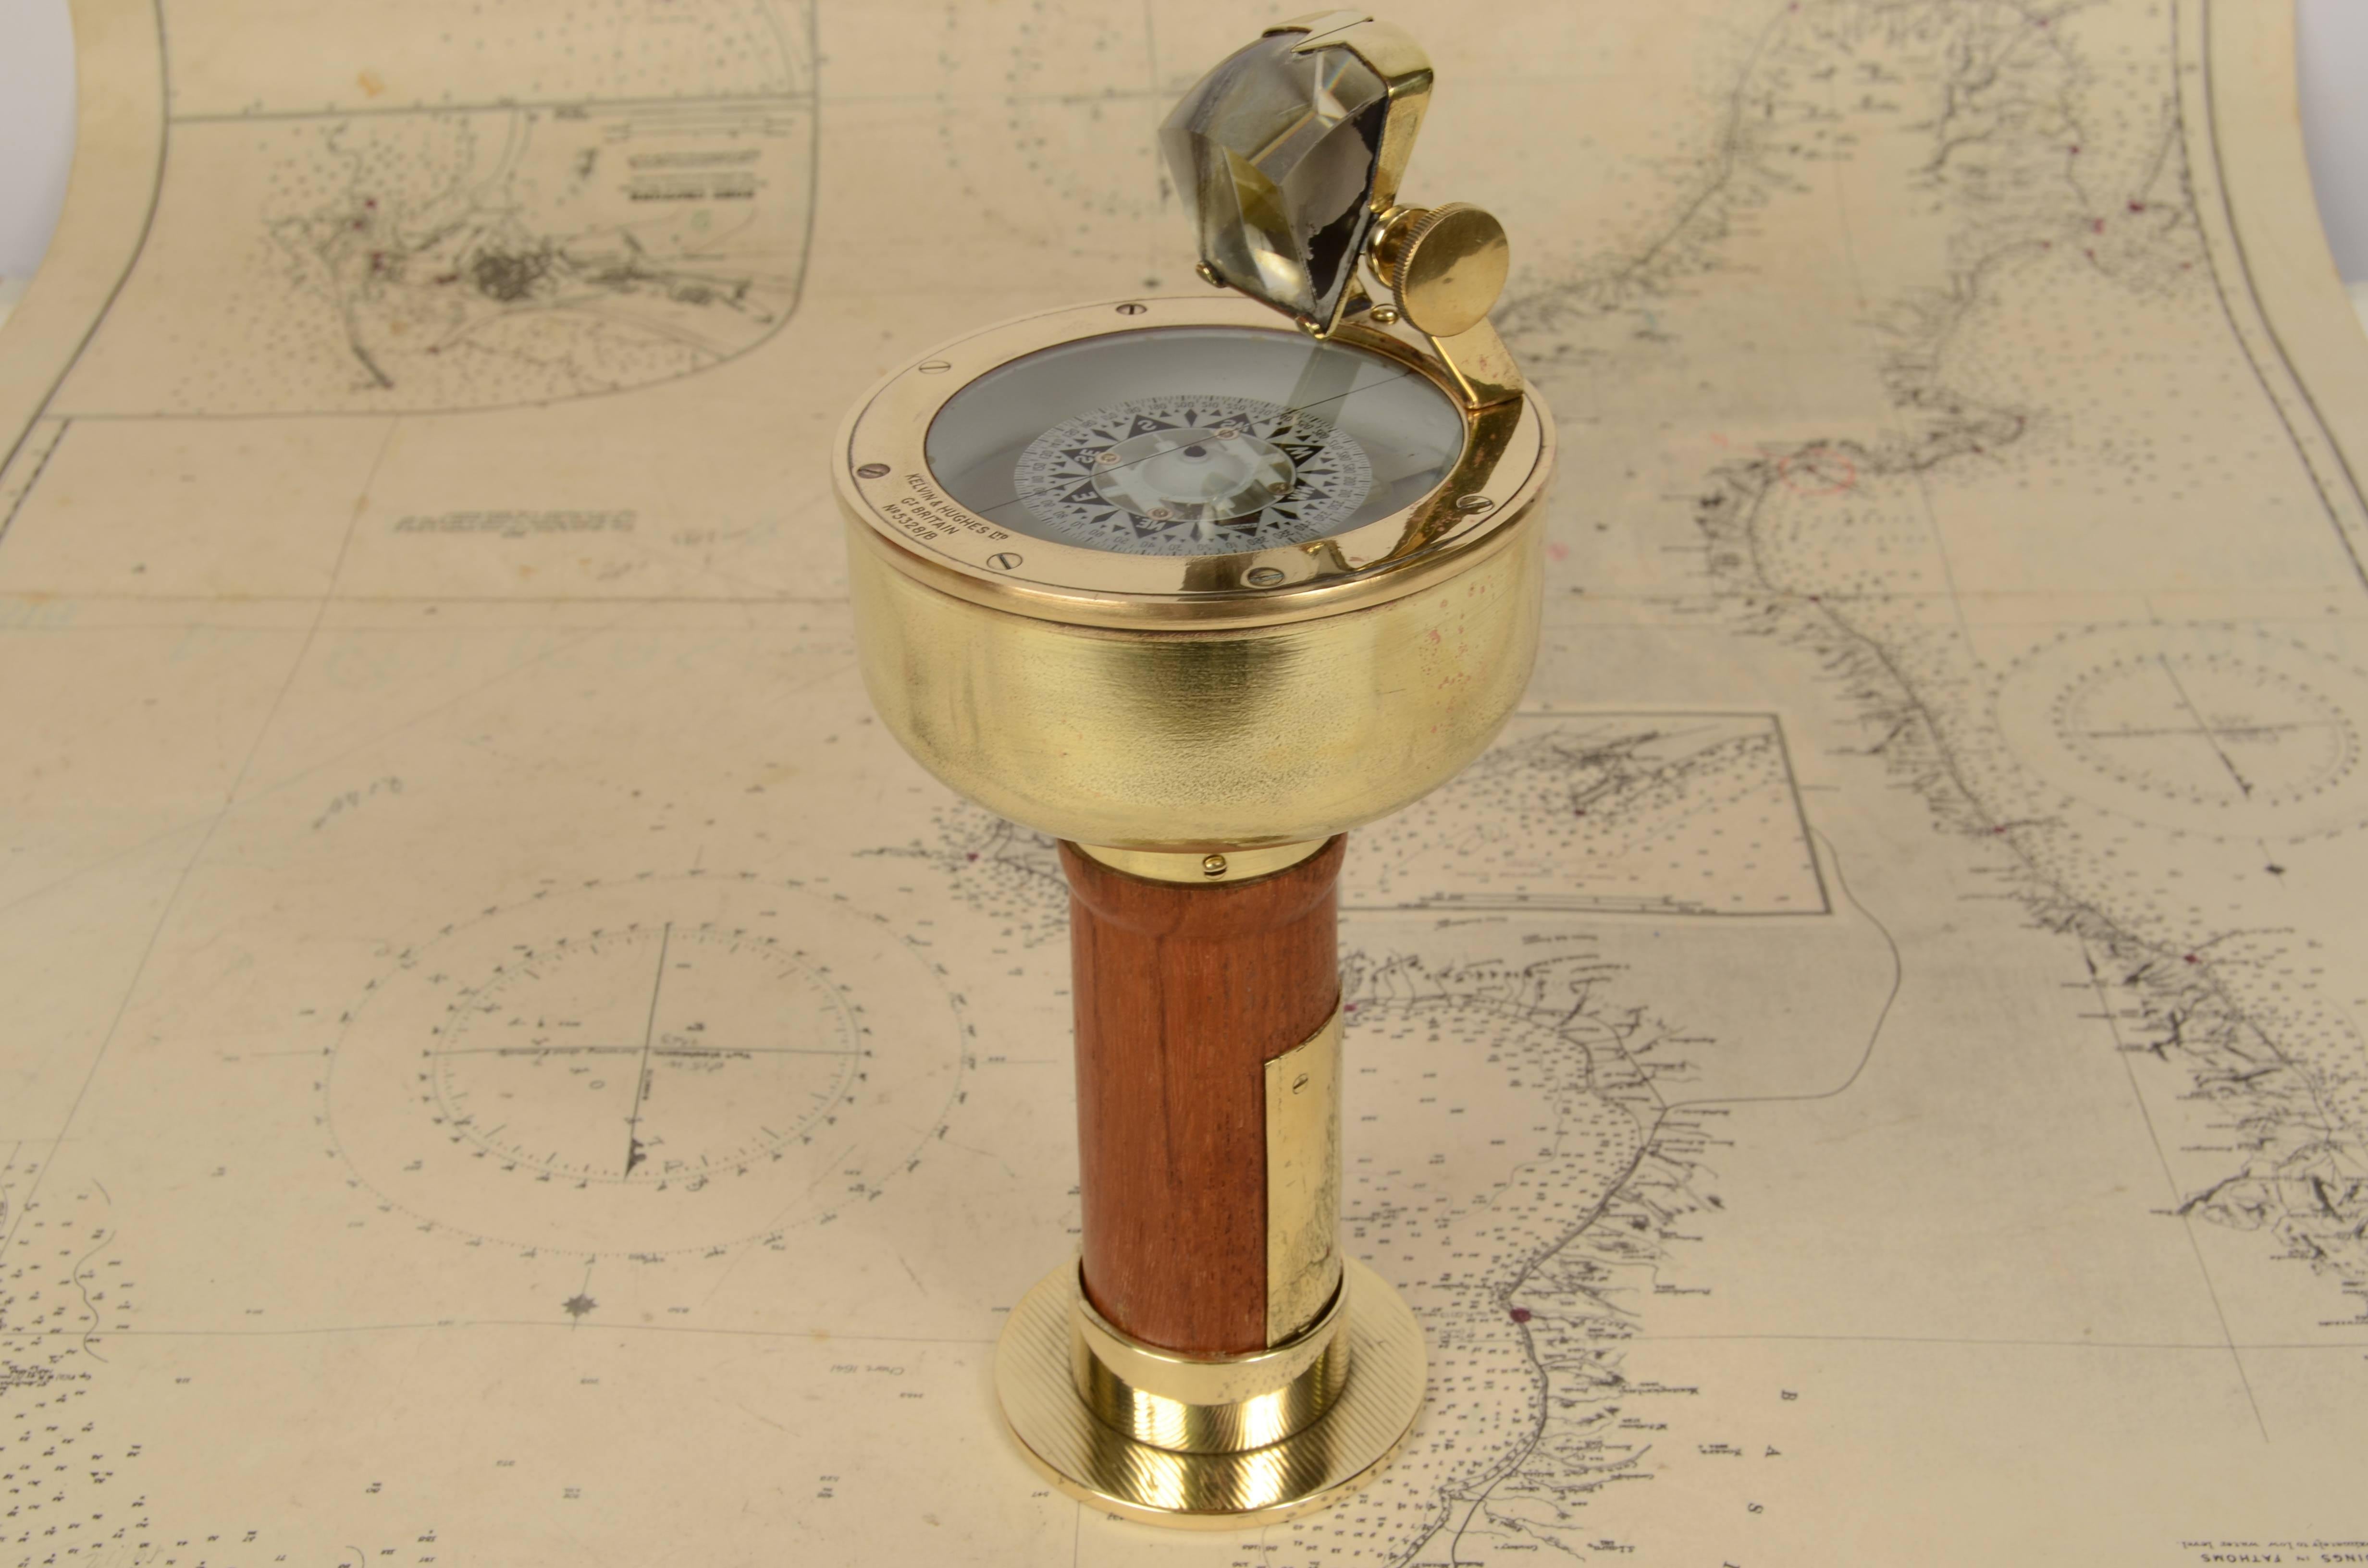 Hand-held magnetic bearing compass, signed Kelvin & Hughes Ltd Gt Britain N. 5328/B, early 1900s. Support base made of turned brass. Height 23 cm - 9 inches, compass diameter 10.5 cm - 4.13 inches. Very good condition.
Kelvin & Hughes company active